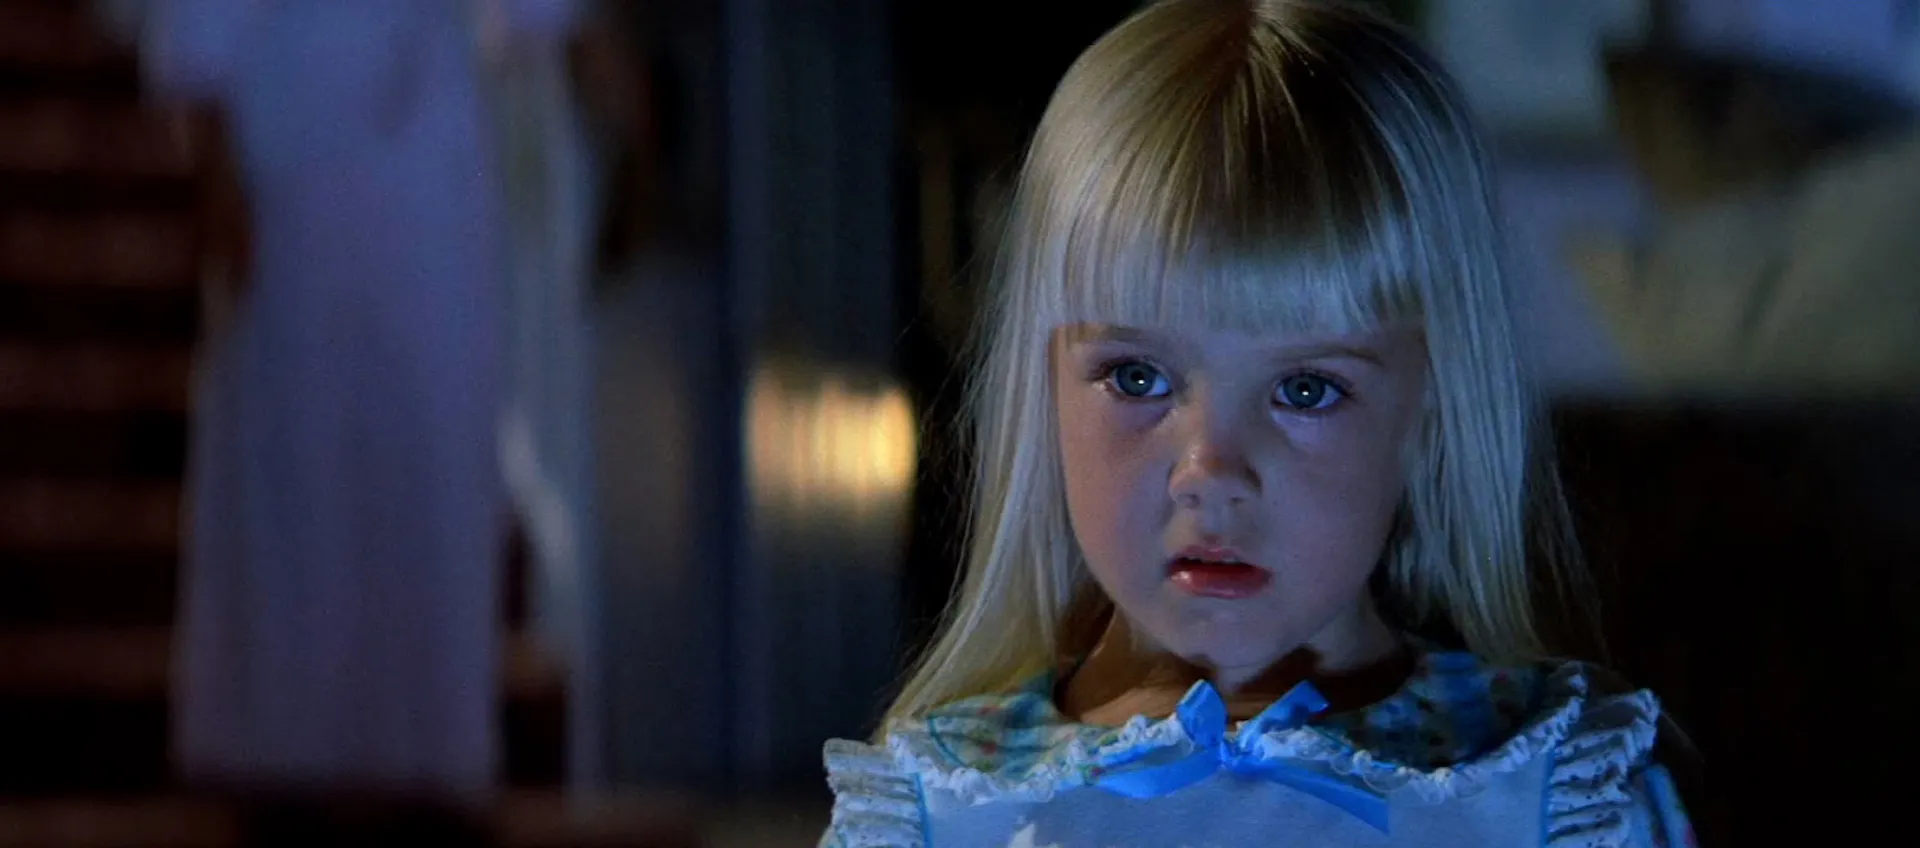 the little blonde girl in the light of the TV in Poltergeist